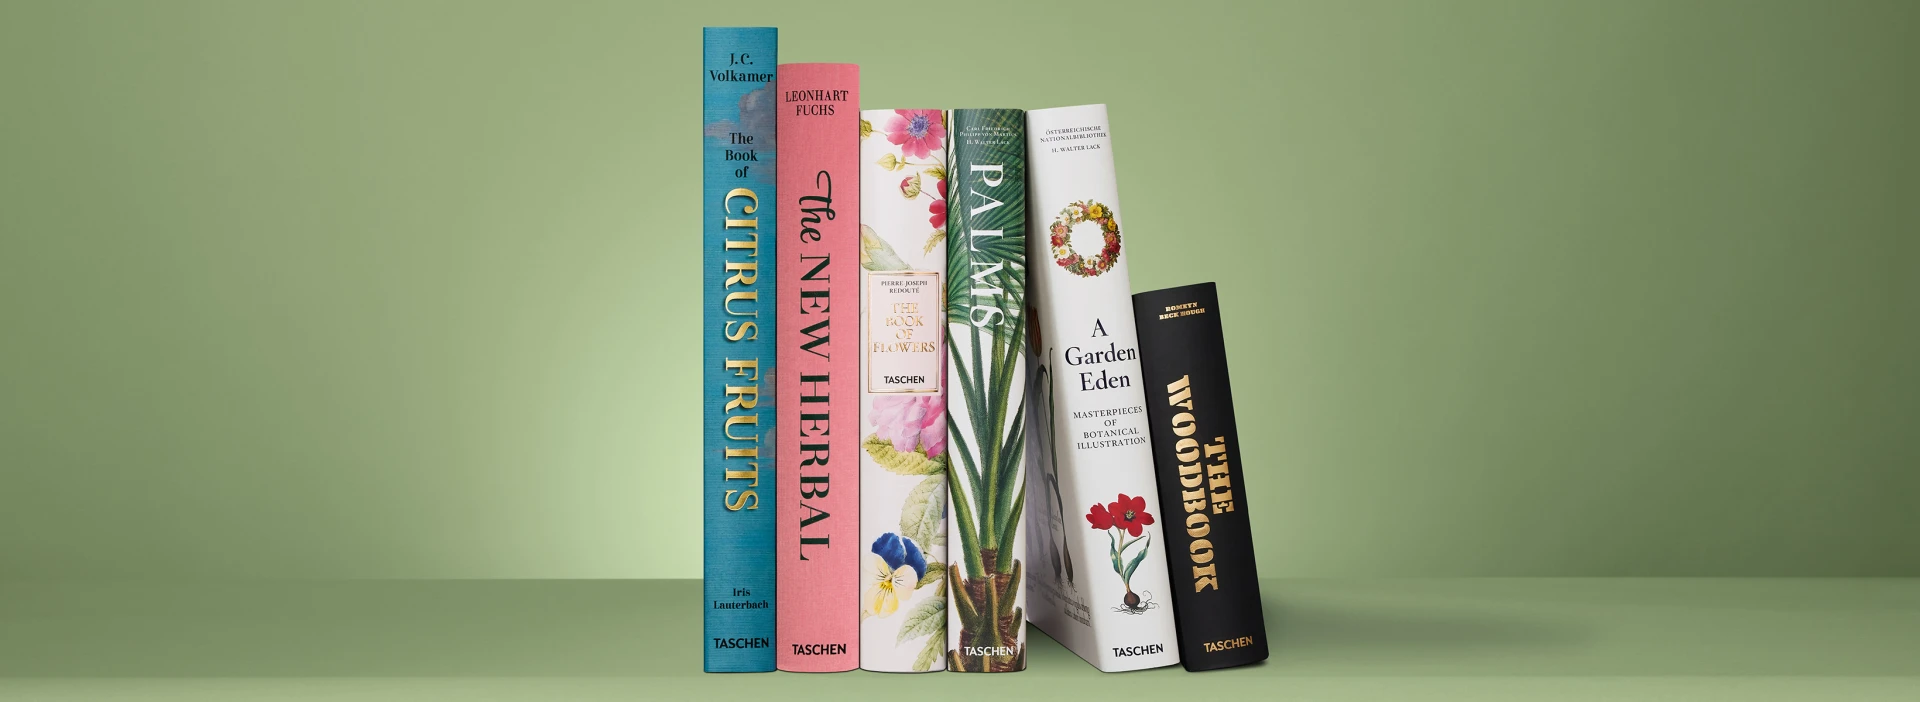 Flower Power. Grow your botanical library.